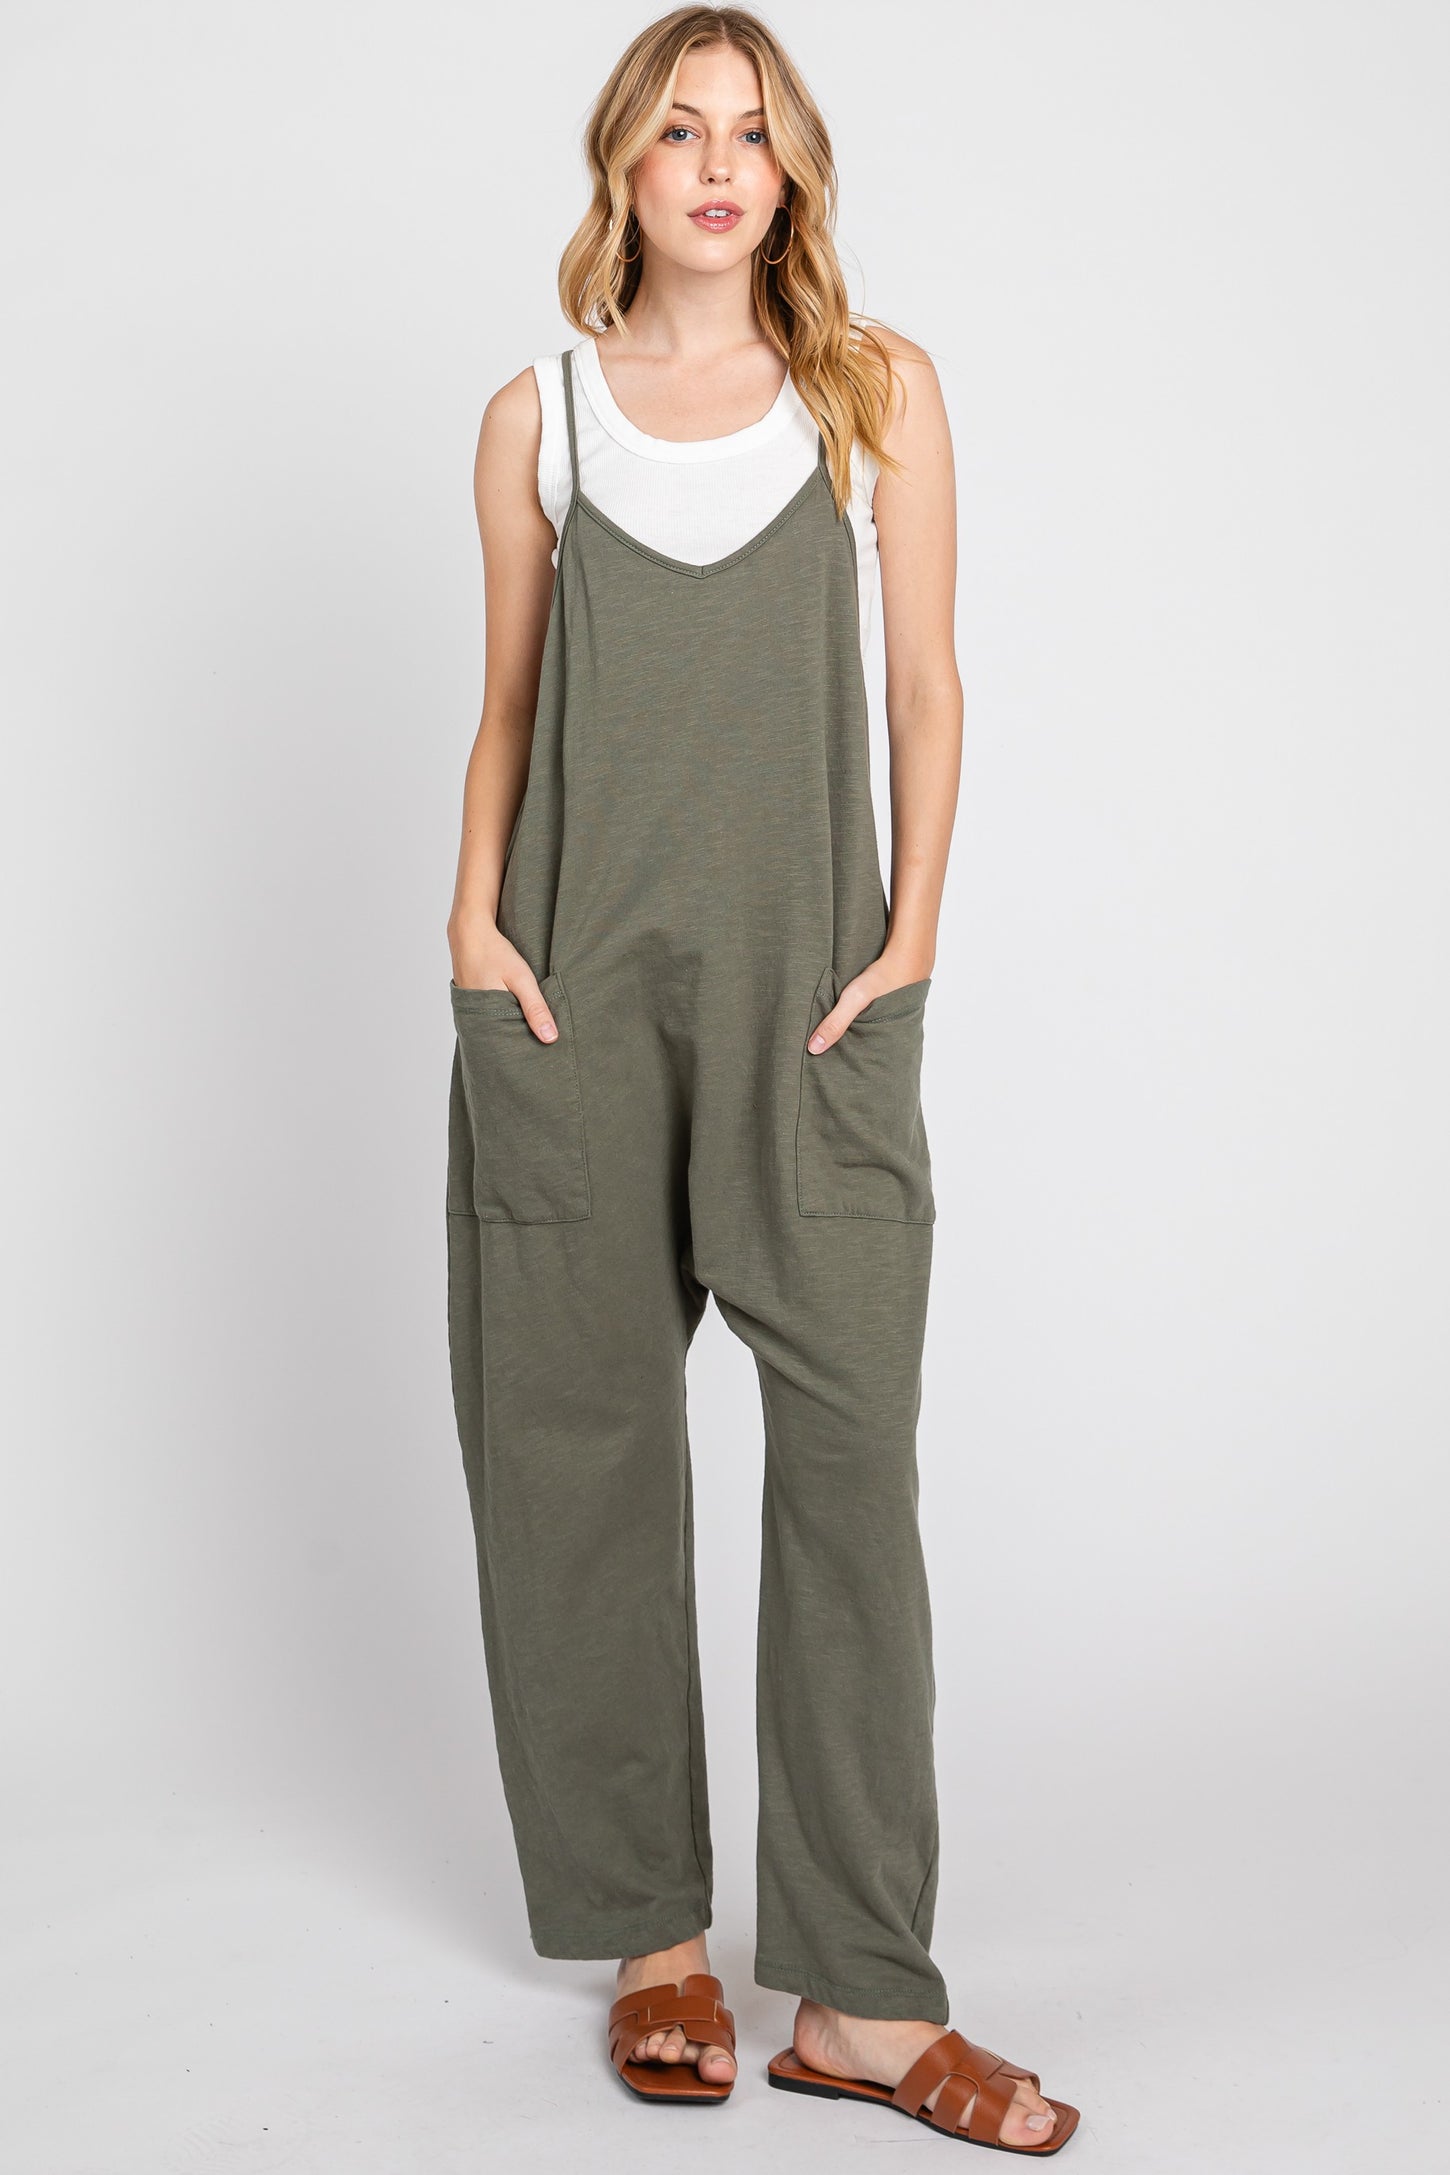 Olive Knit Front Pocket Maternity Overall– PinkBlush